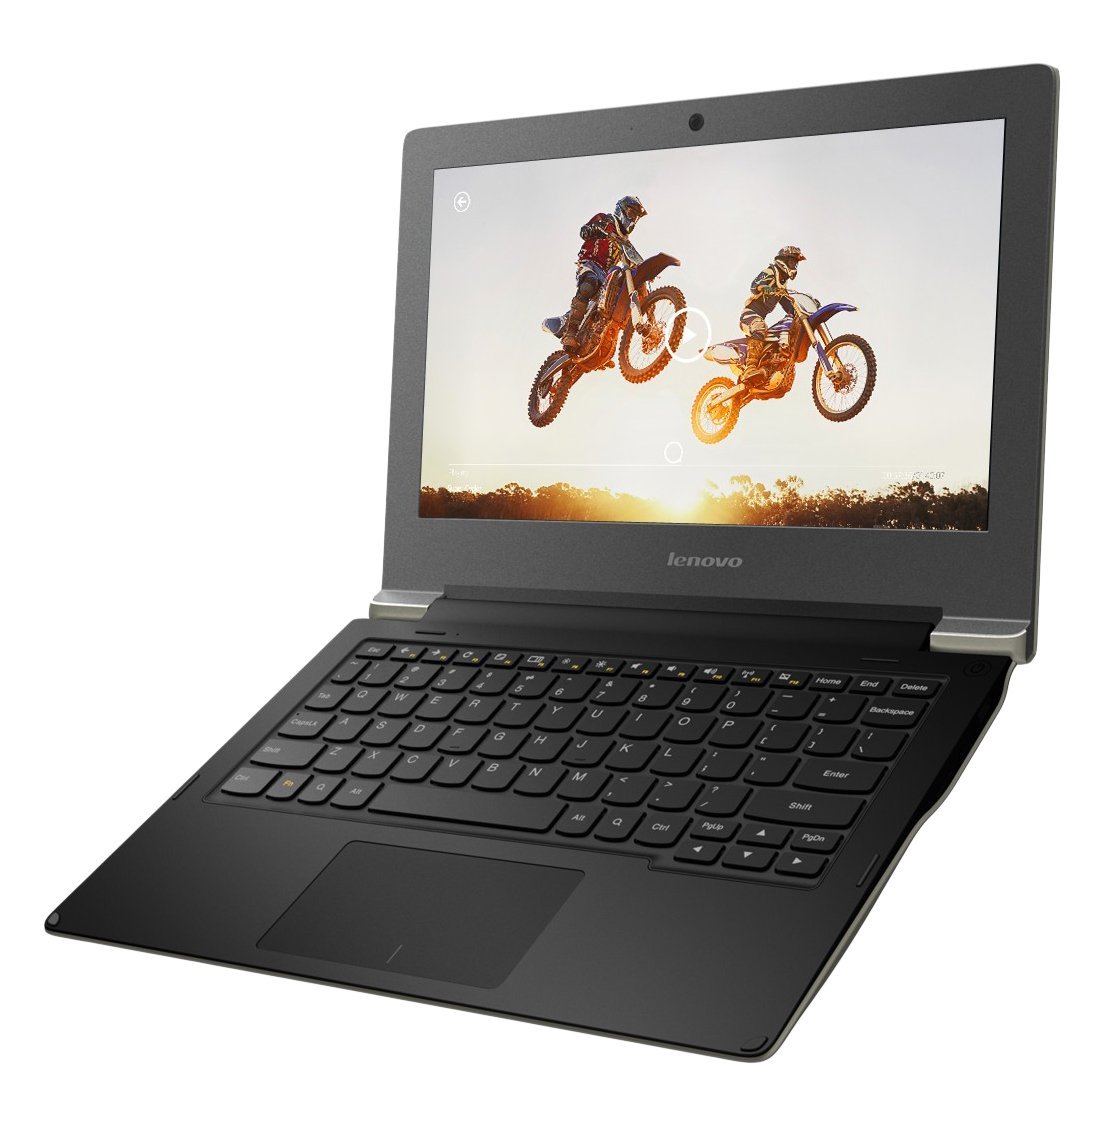 back to school sales, back to school 2015, cheap laptops, laptops, laptop, laptop deals, laptop sales